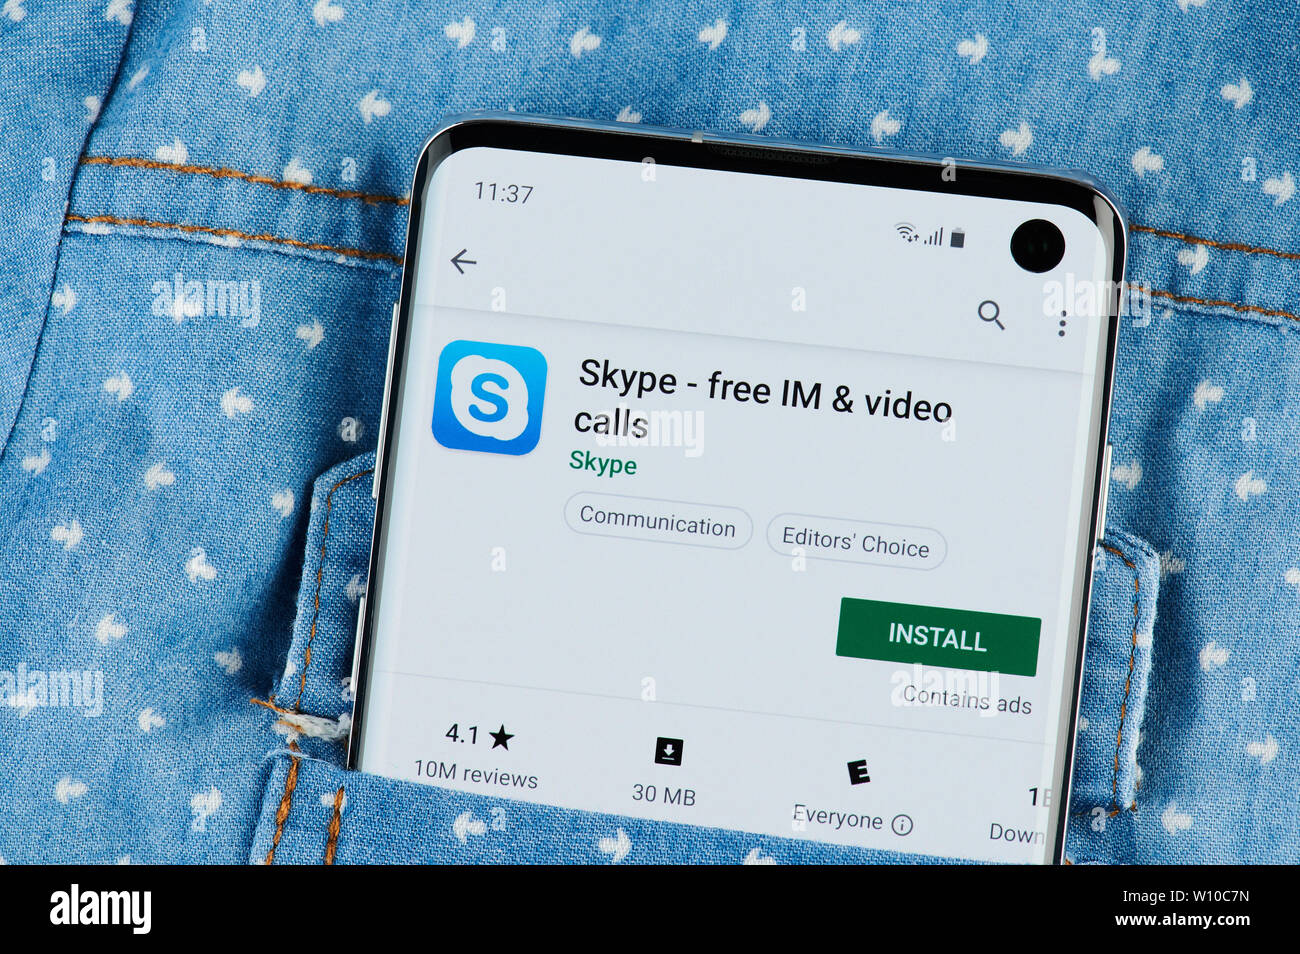 New york, USA - June 28, 2019: Installing skype application on smartphone screen close up view in shirt pocket Stock Photo